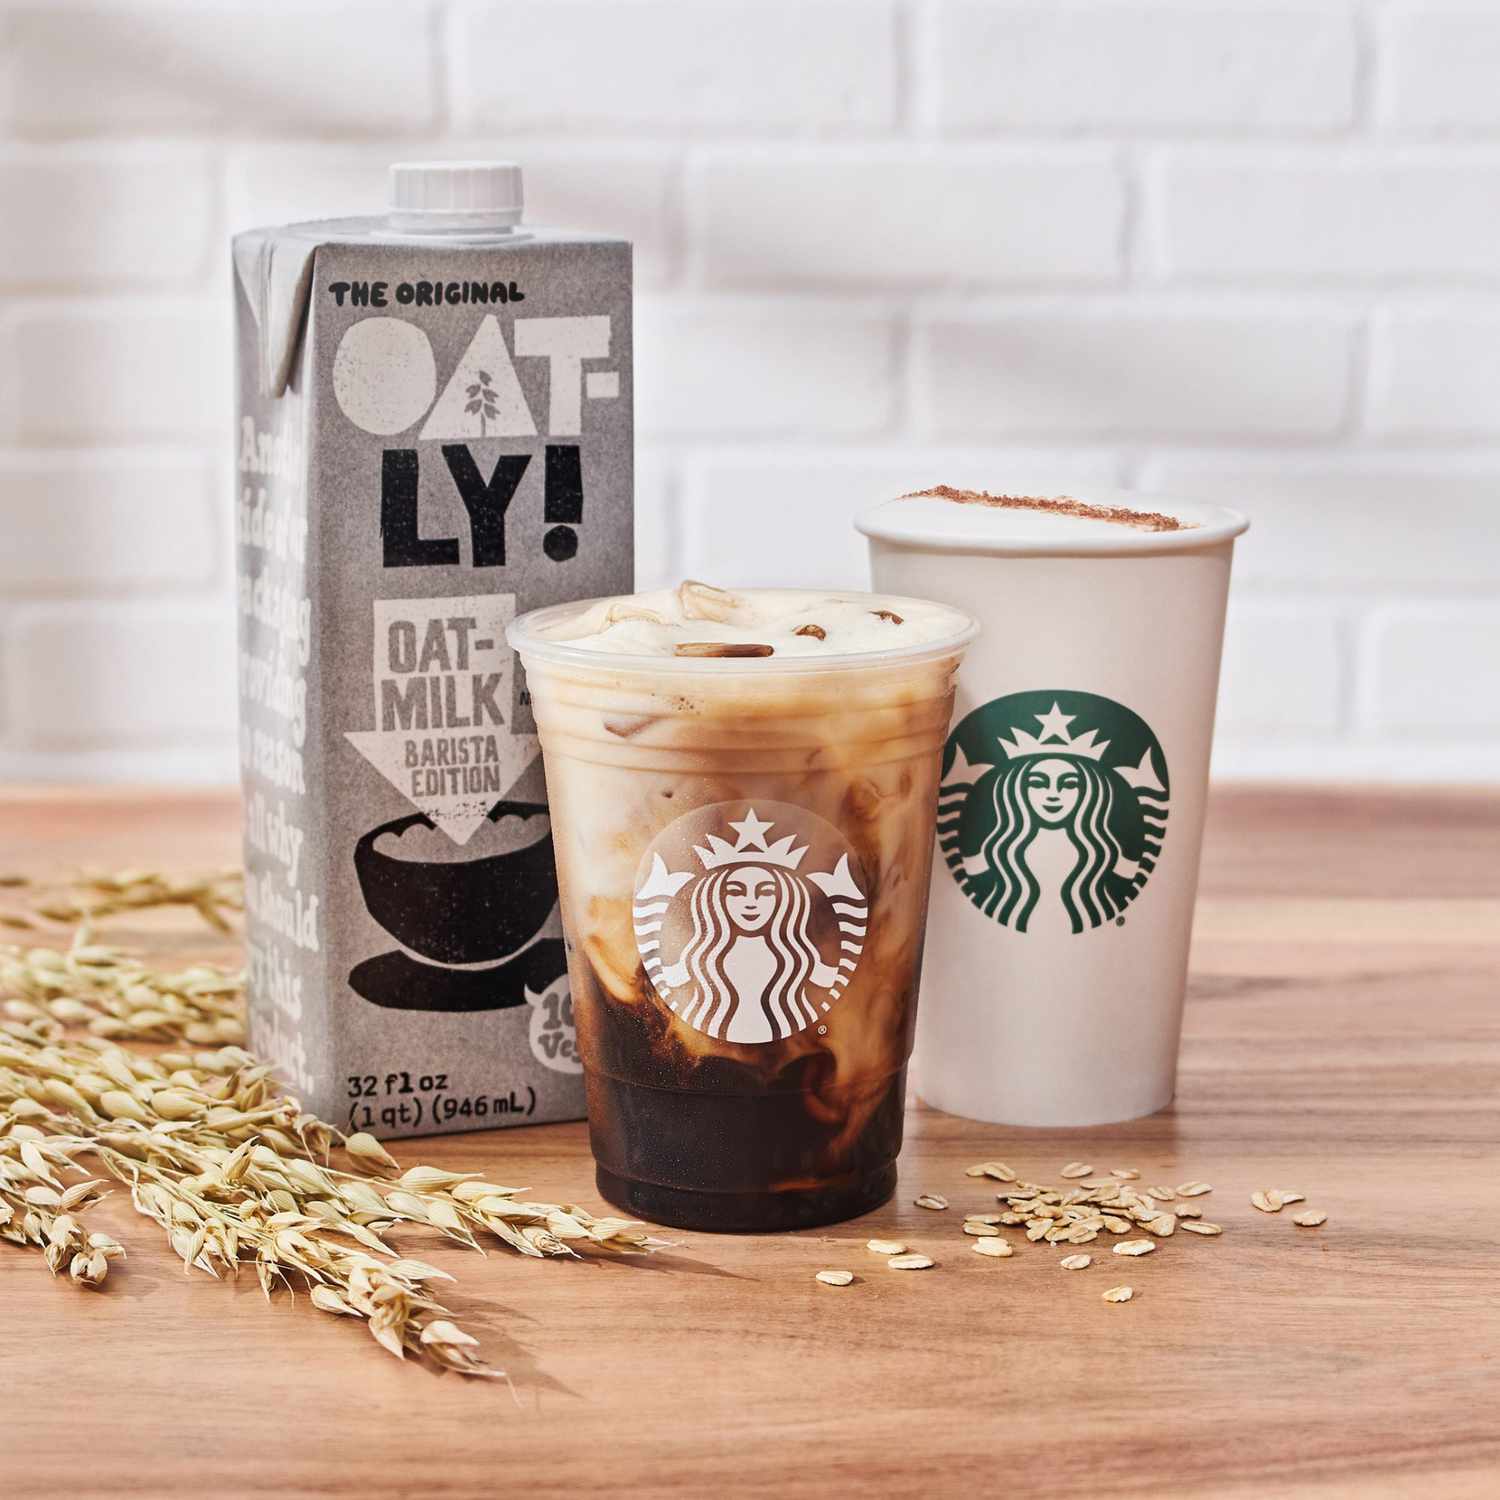 Starbucks Launches Oatmilk on Menus Nationwide - See the New Spring Menu - ...